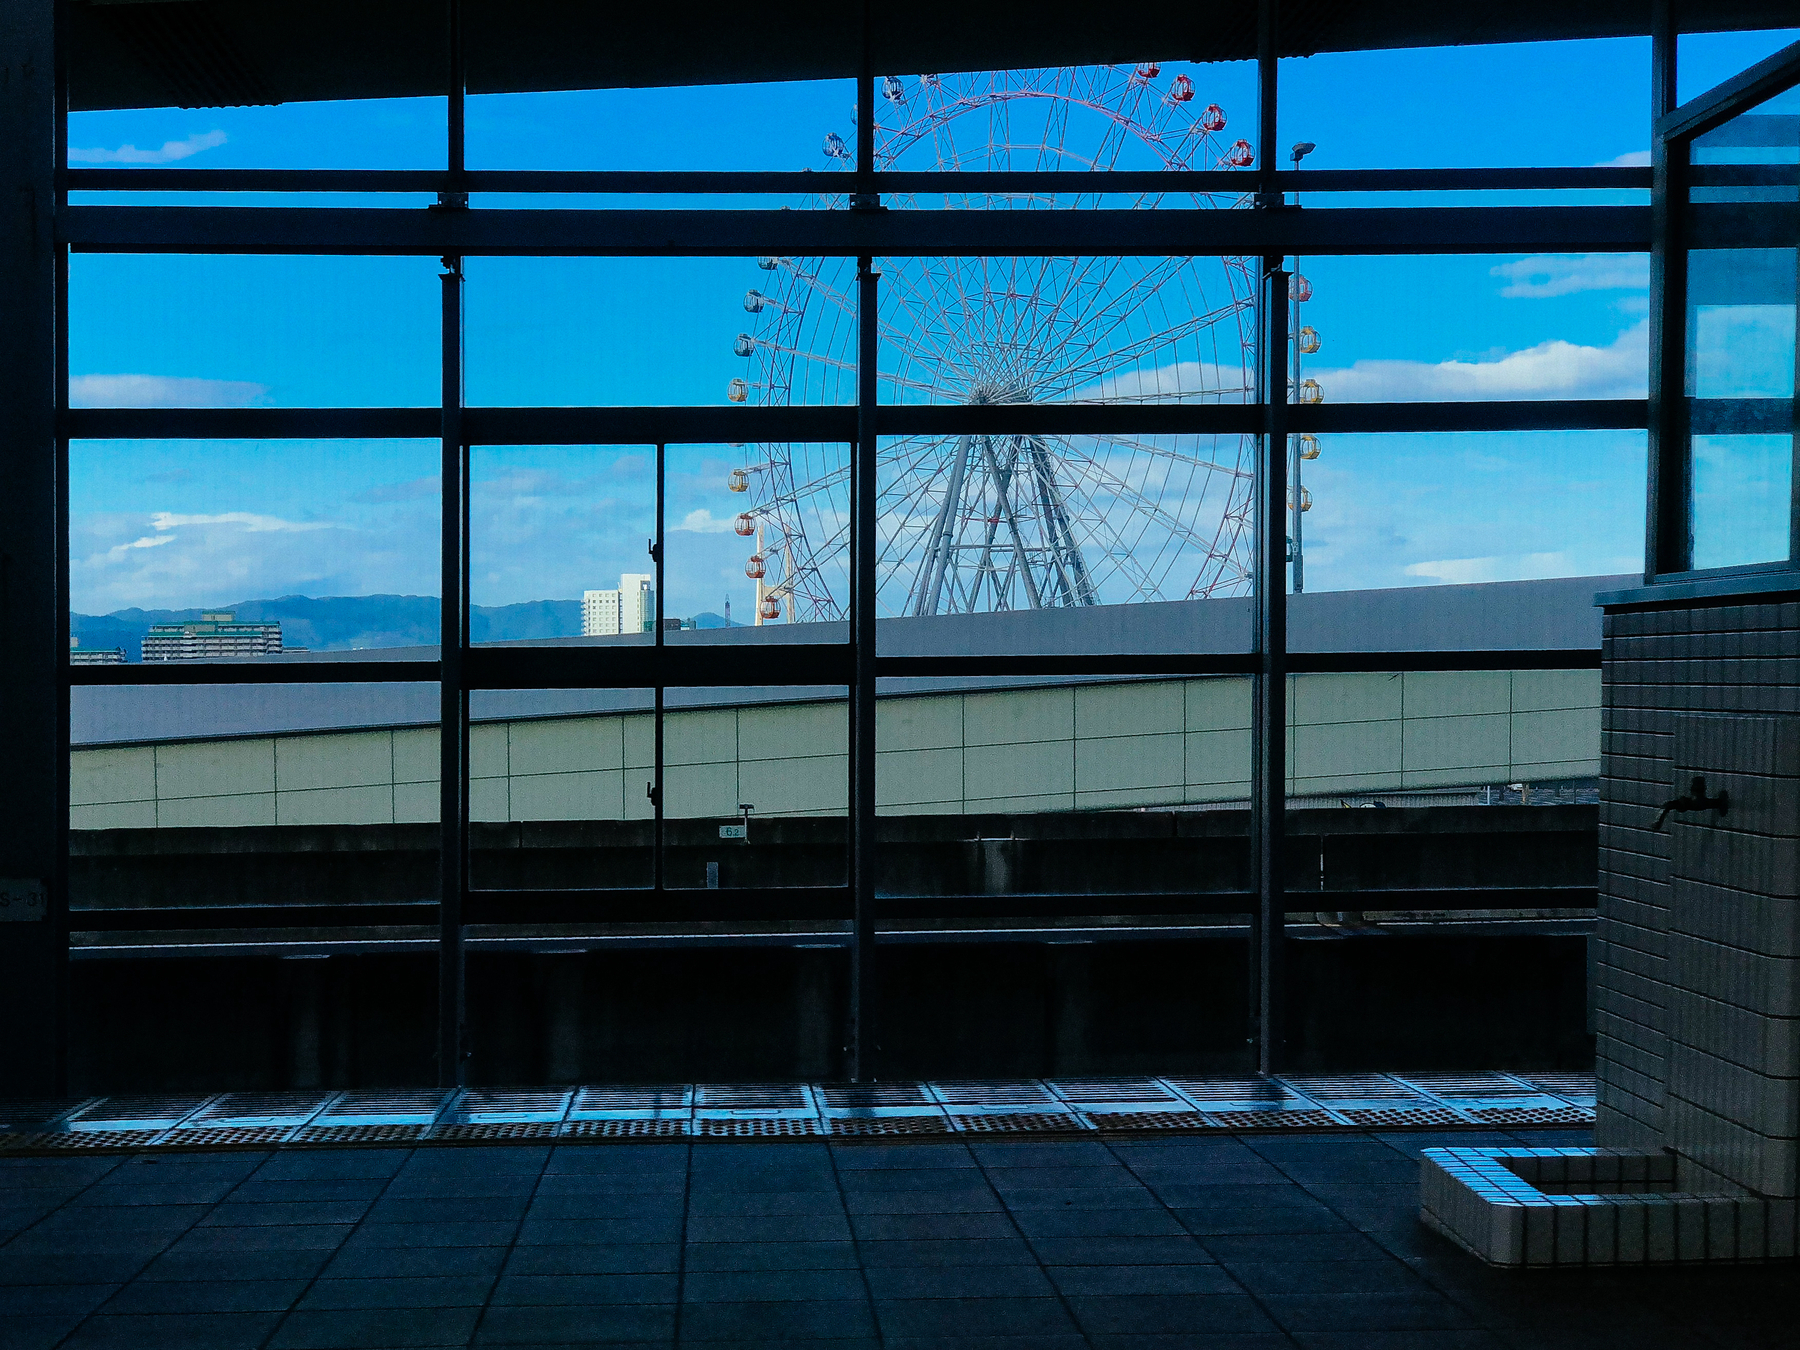 A giant Ferris wheel is seen from inside some sort of industrial building. 